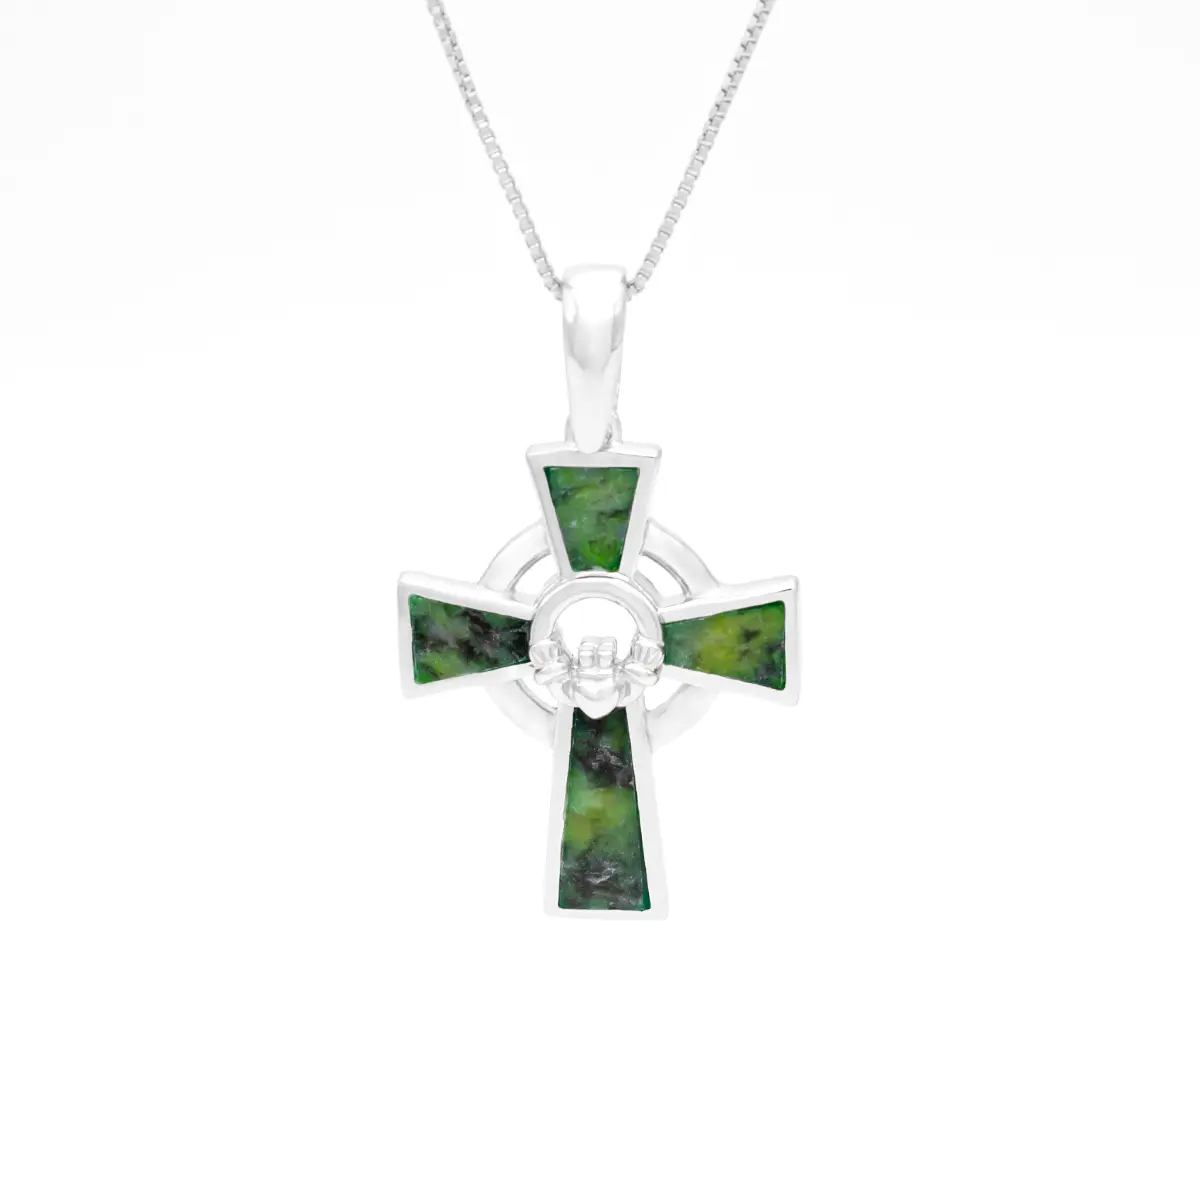 Connemara Marble Claddagh Cross Pendant in Sterling Silver